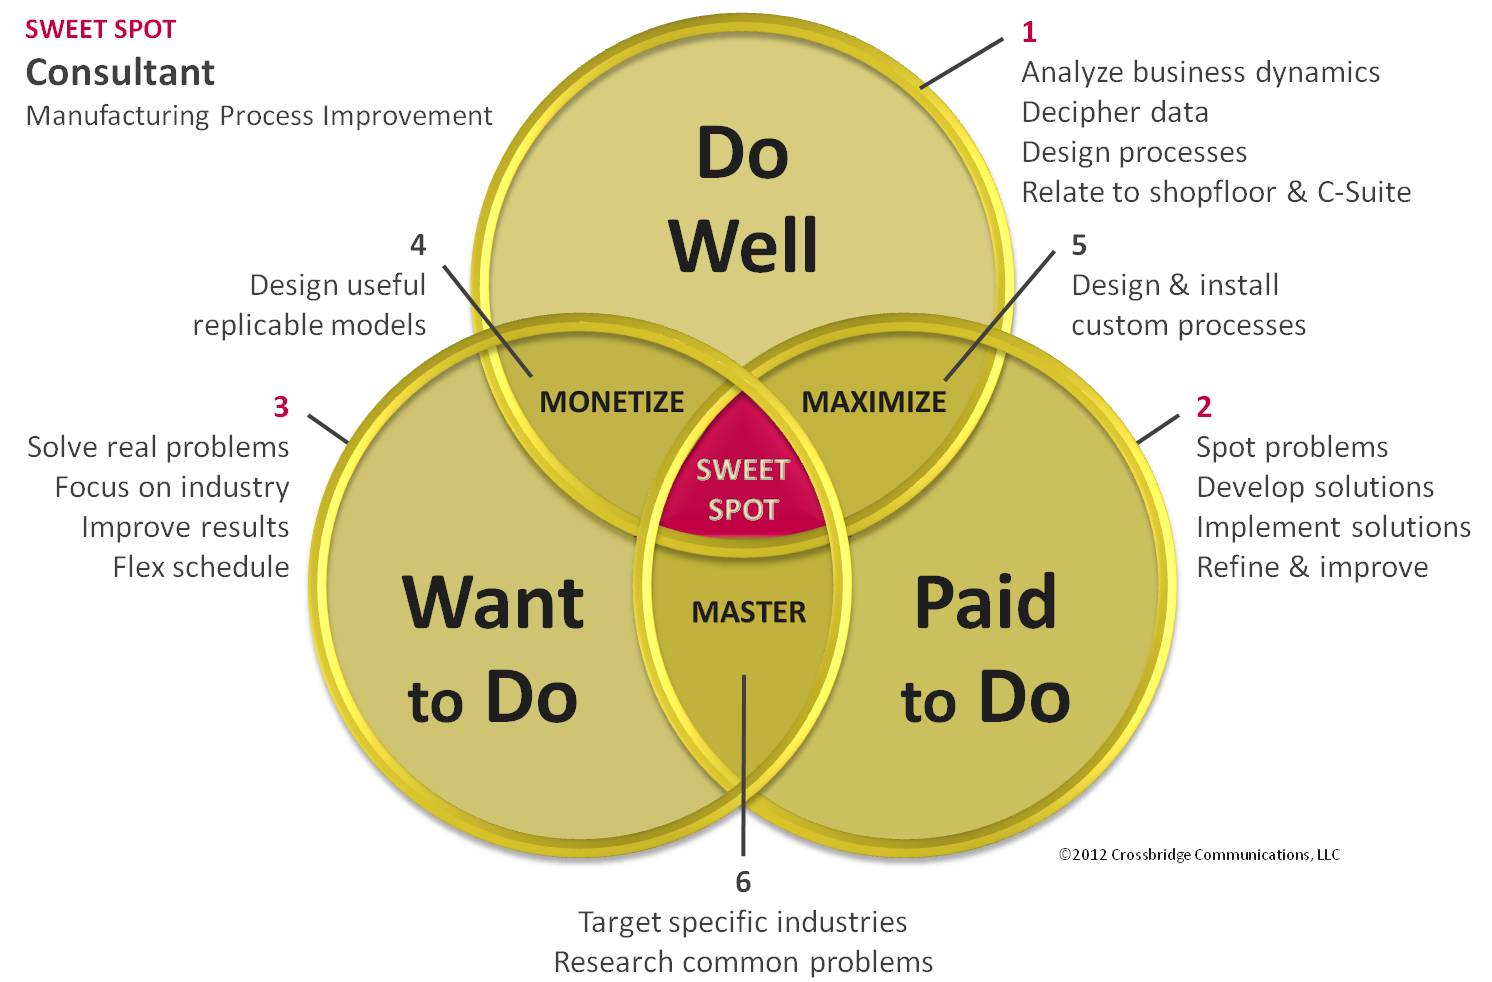 Beyond Words: Strategy  The Sweet Spot in Action